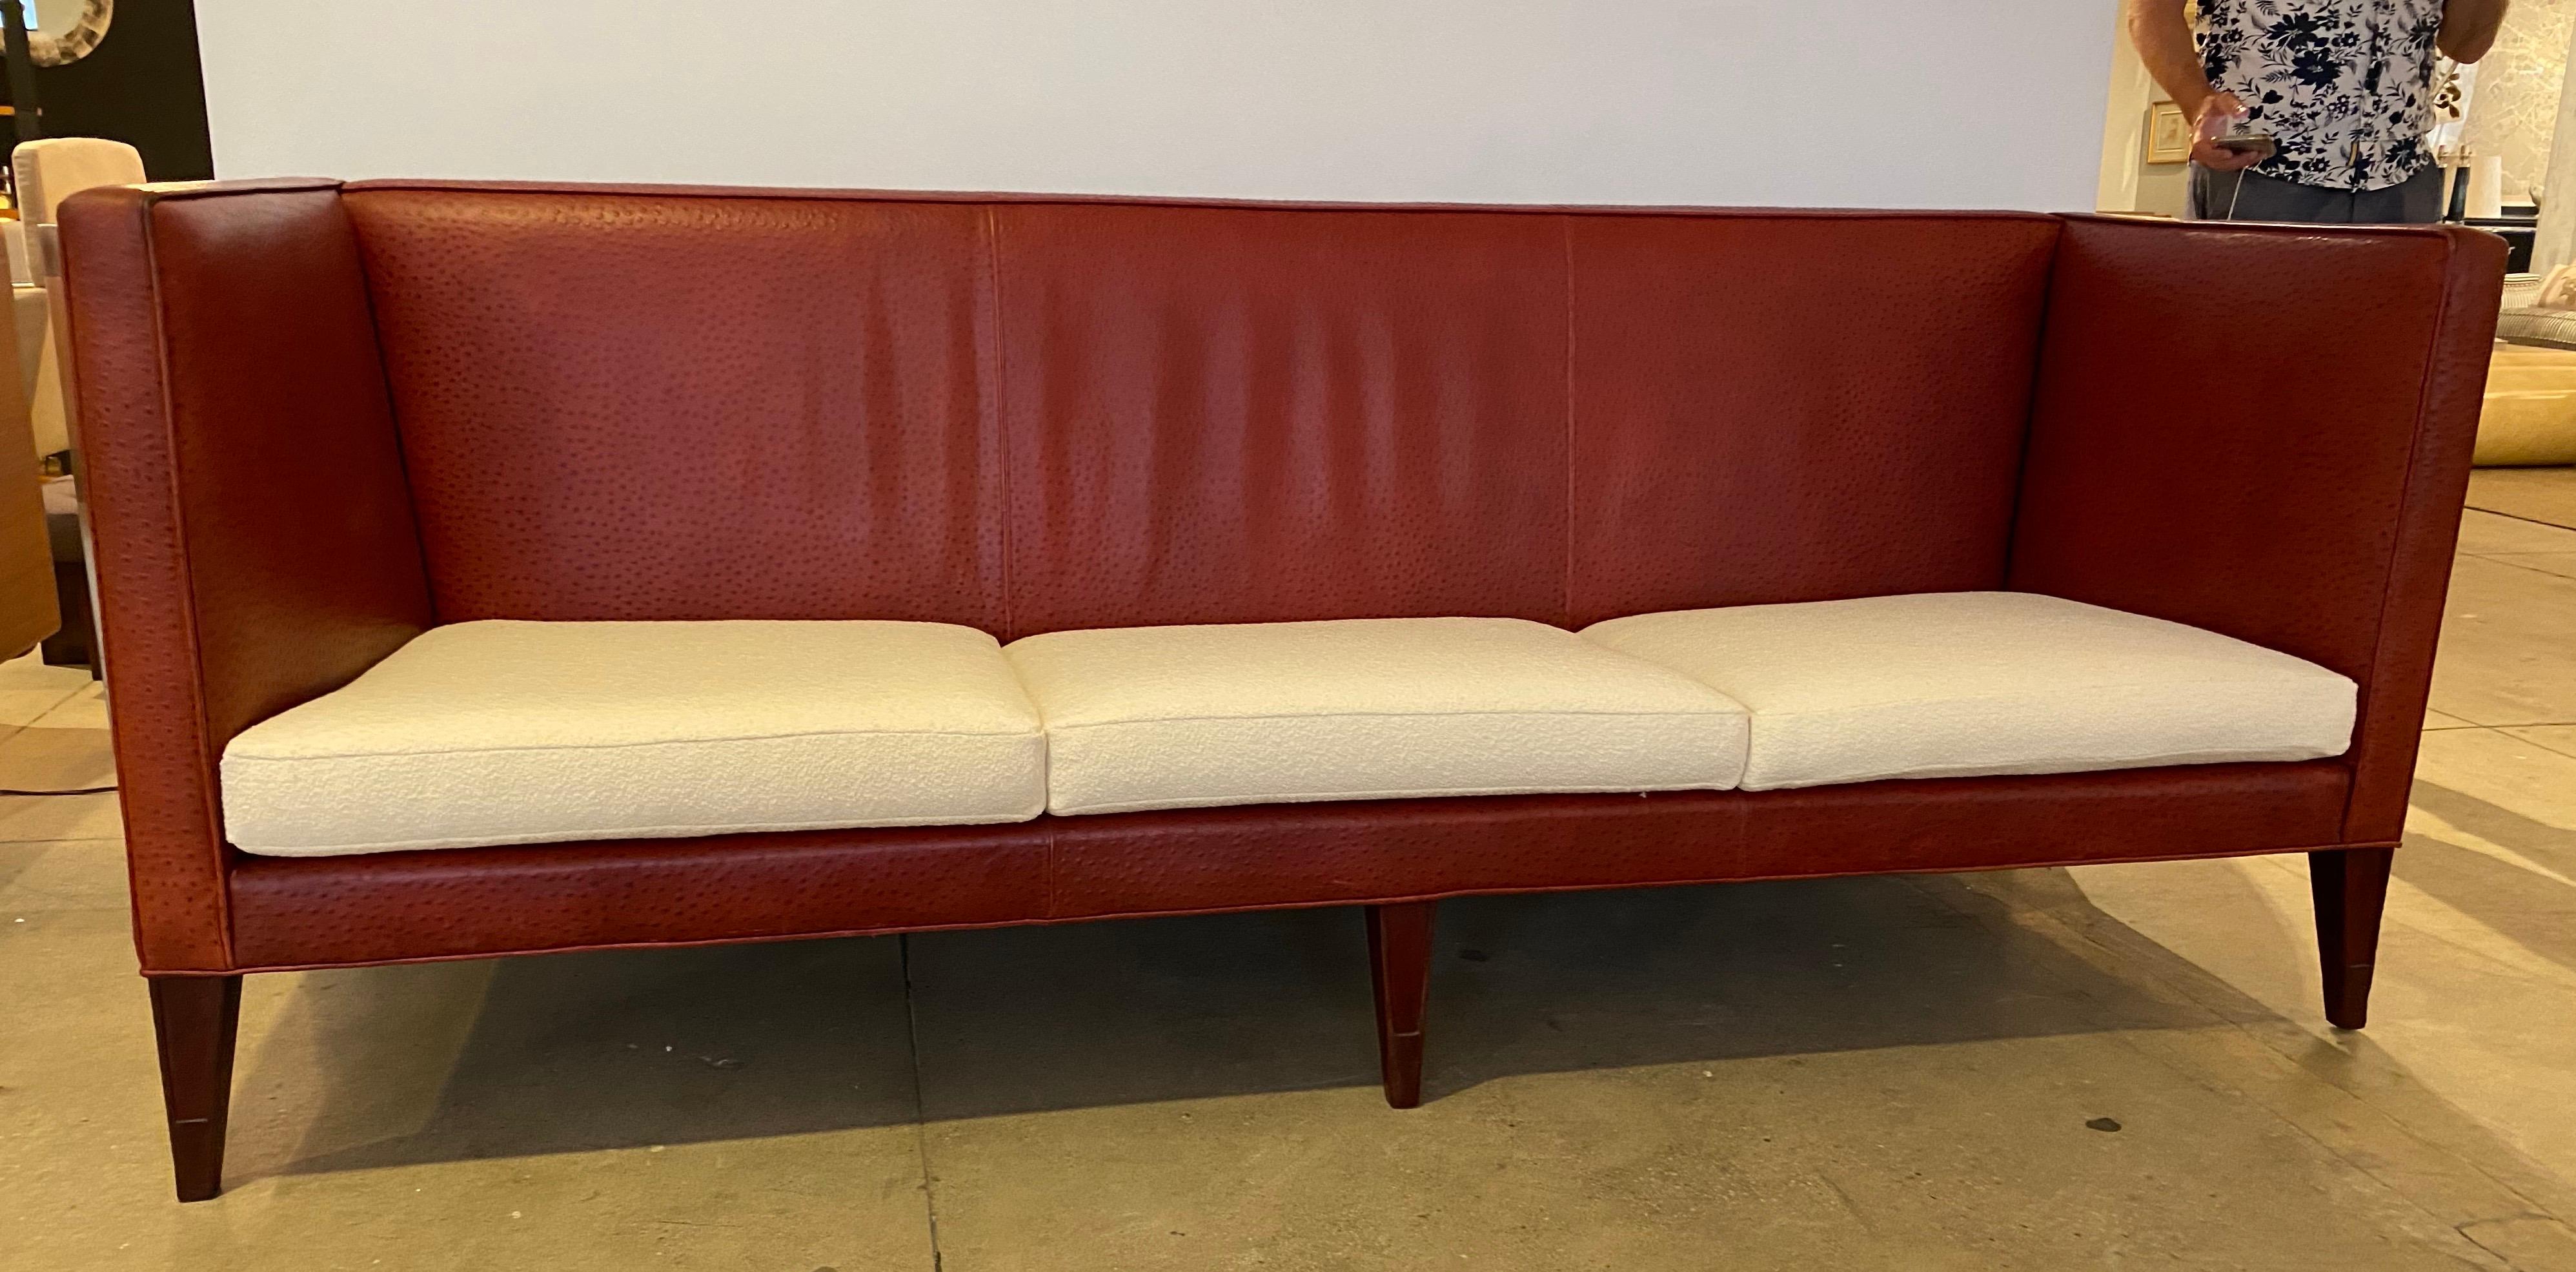 Philippe Starck Redwood Room Clift Hotel Leather Sofa 3